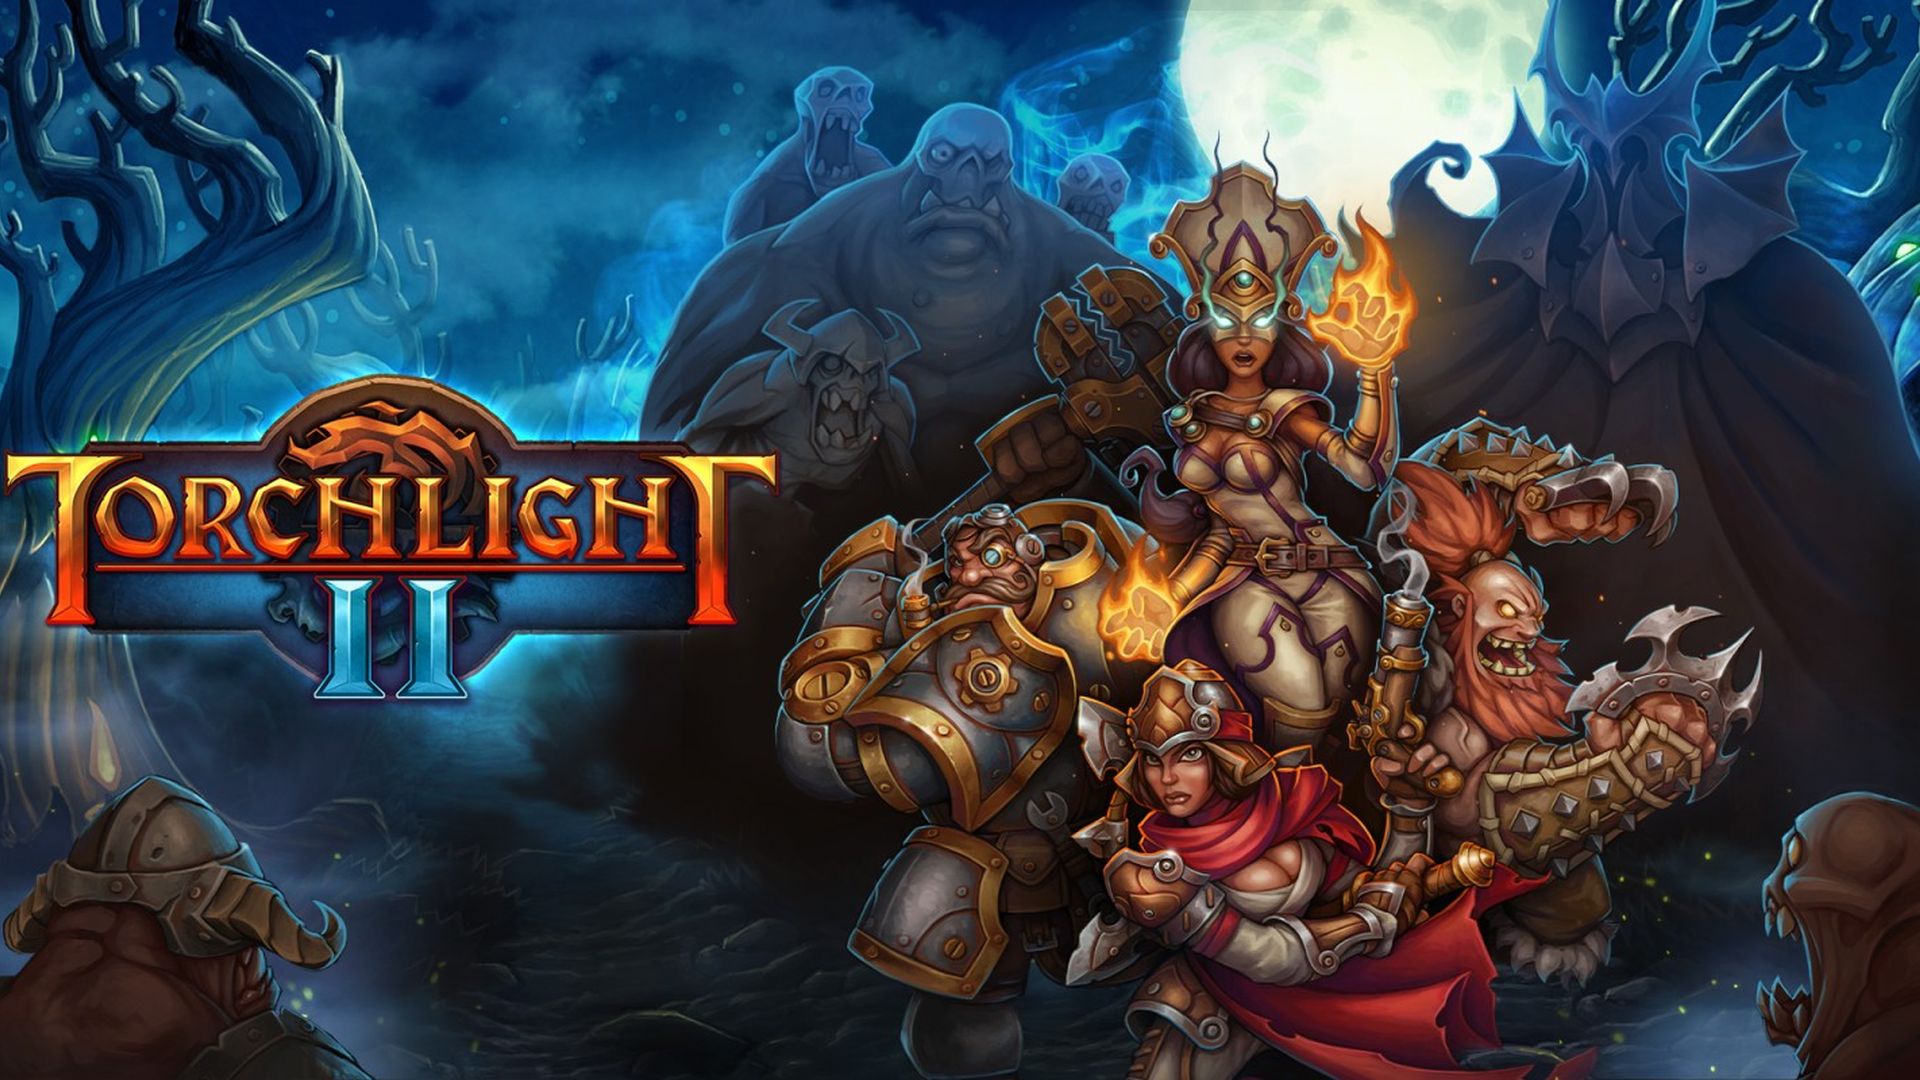 Is torchlight 2 for macbook pro